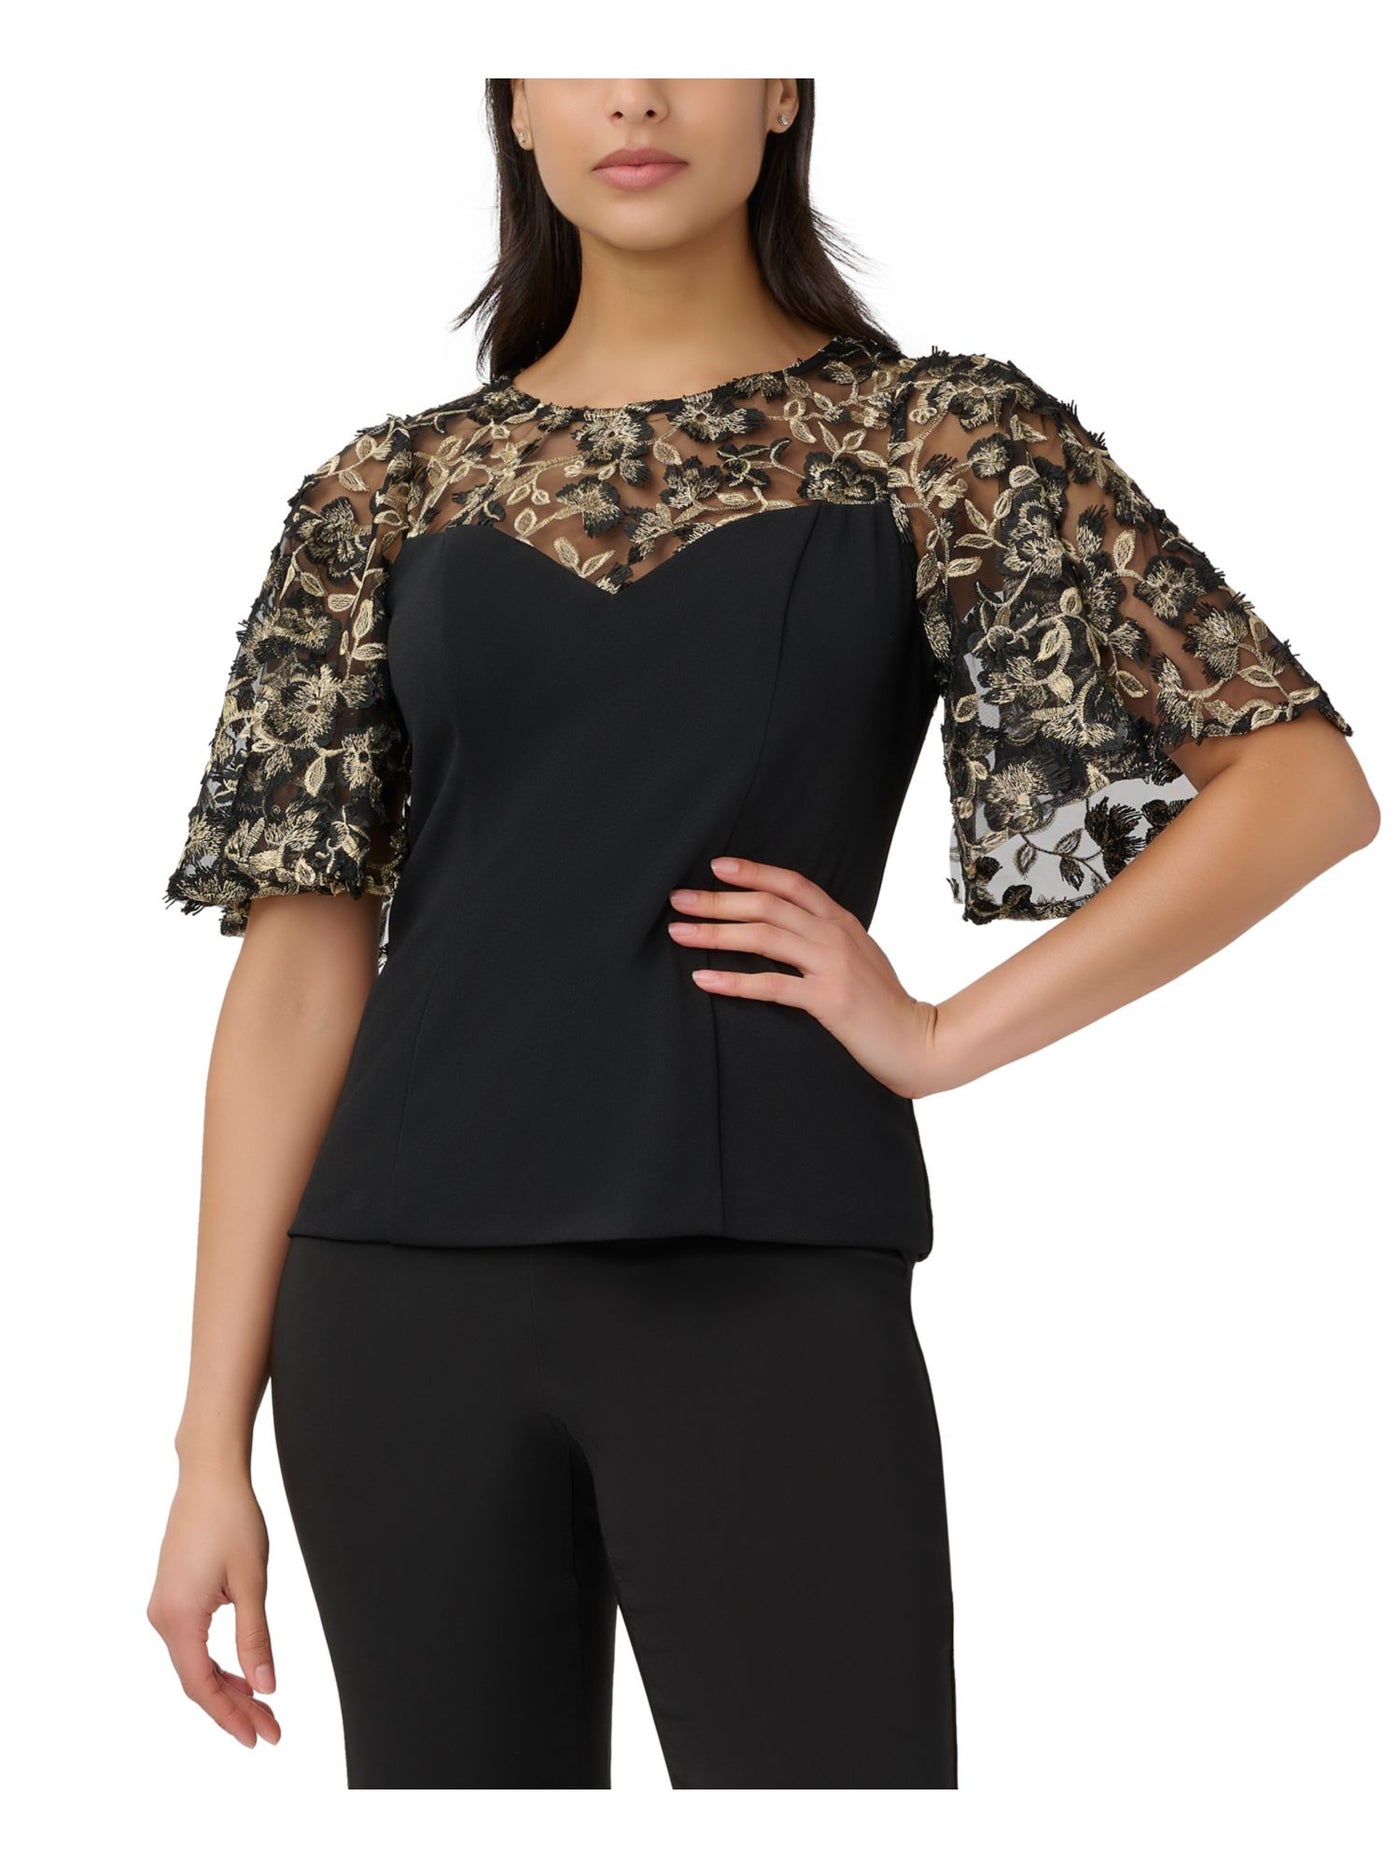 ADRIANNA PAPELL Womens Black Zippered Floral Short Sleeve Illusion Neckline Wear To Work Top 10